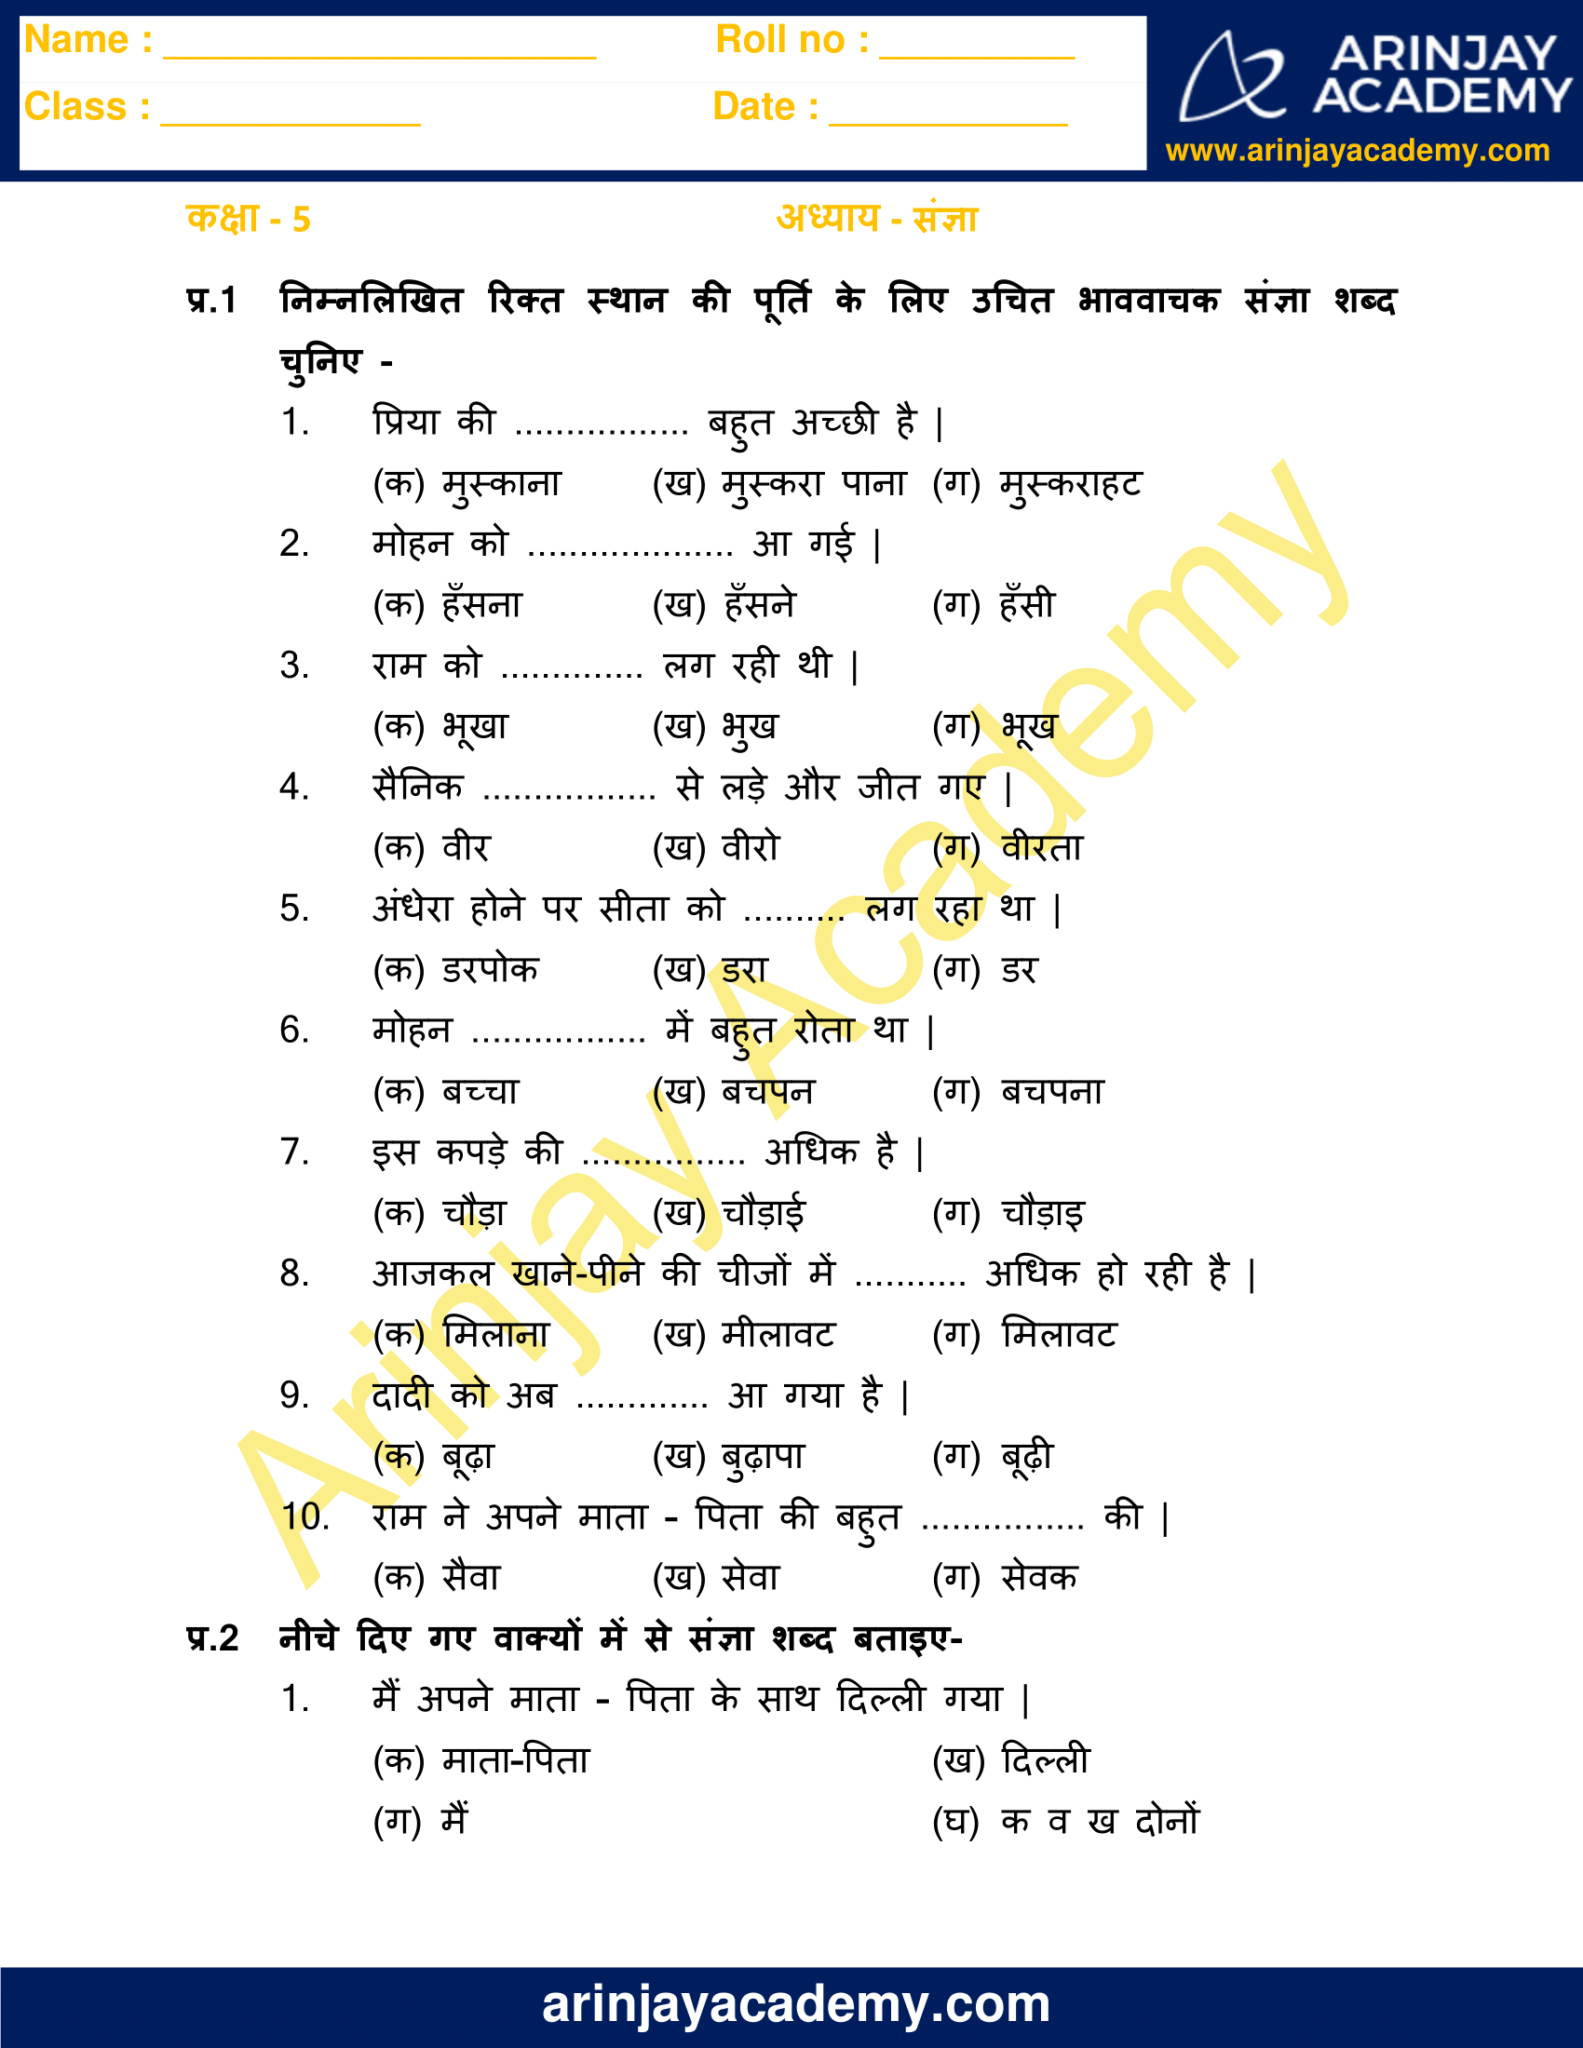 Sangya Worksheet For Class 5 Free And Printable Arinjay Academy